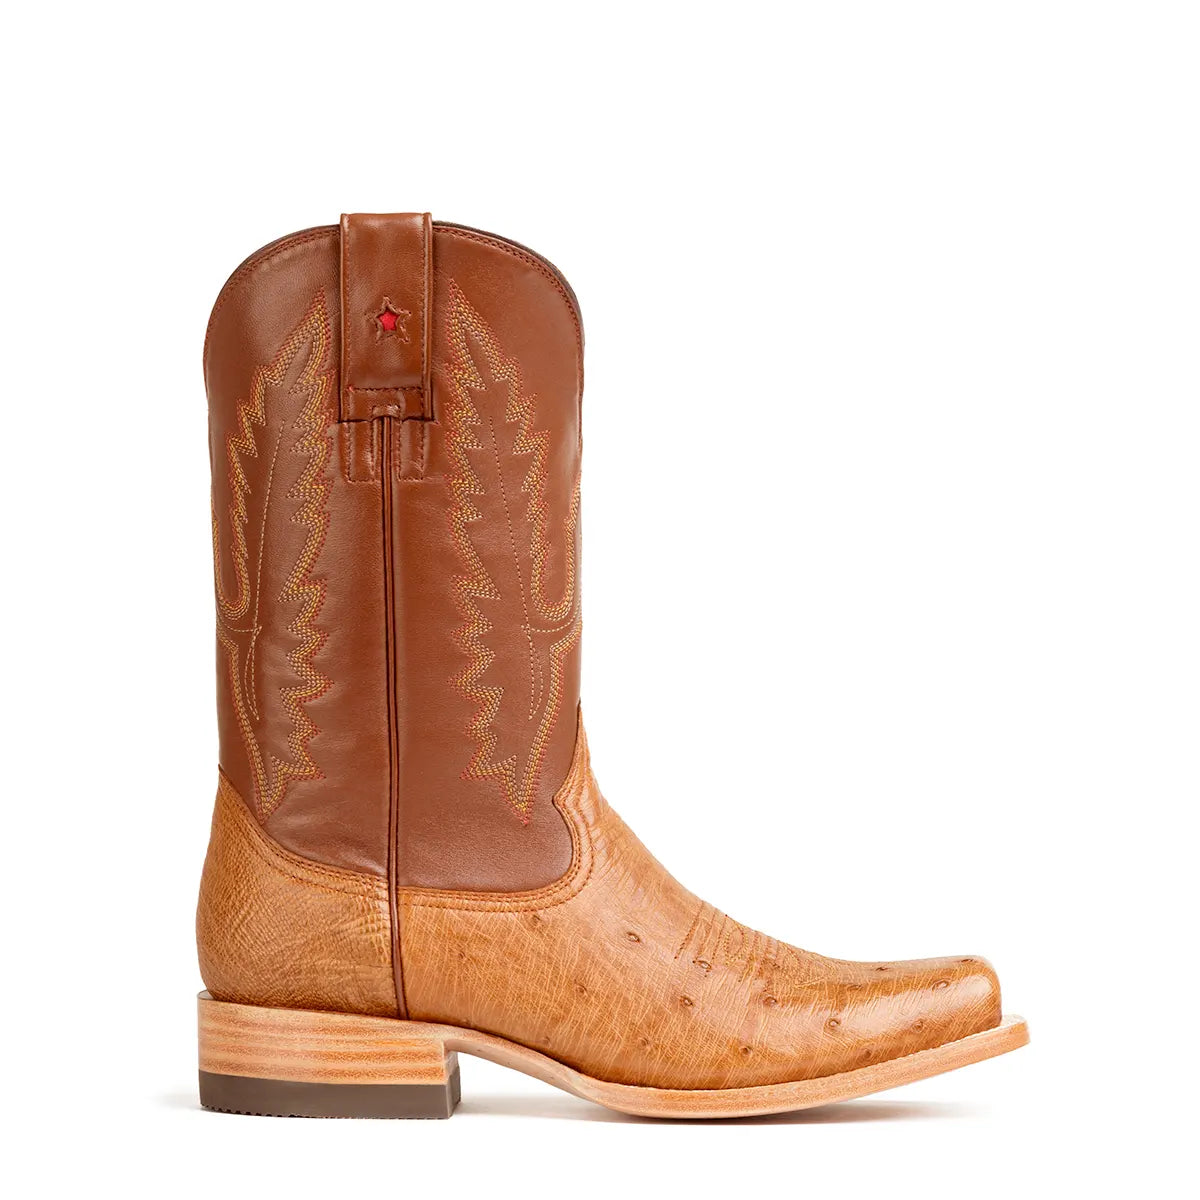 Arroyo Smooth Ostrich Stockman Square Toe Boot - Cognac